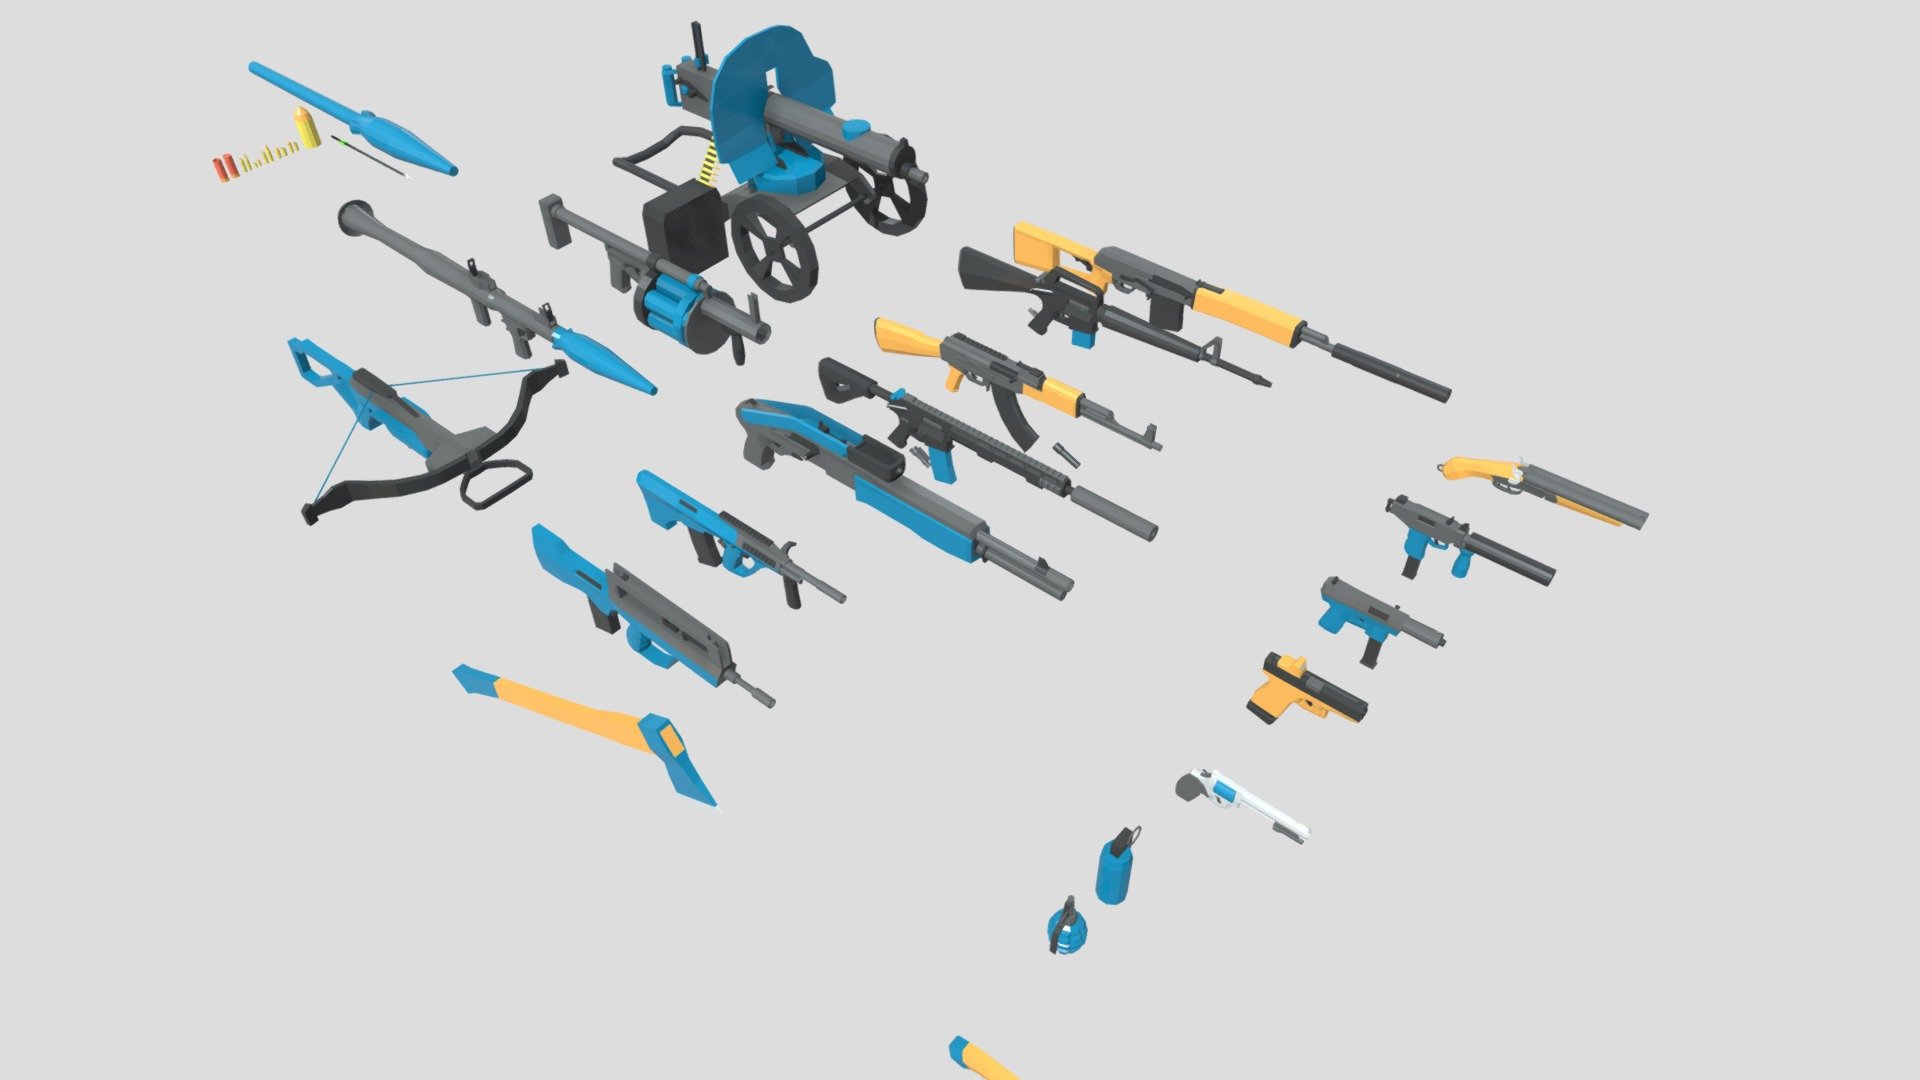 If you want to use animation in 3d max, please download the archive “lowpoly_gun_ALL.7z”. In a text document, all keys from the animation are registered.

packaged in formats: blend, fbx, obj, 3ds

A set of 20 models of weapons, the most popular guns, pistols and ammunition All moving parts are separated from parent mesh and have their pivots in right positions. Also there is bones and animation of reloading and shooting at the weapon. The models are optimized and ready for import into the game engine.

This model is modeled in Blender 3D, rendering performed using cycles, just as there are formats for import into other programs. Question on the model? write to me Thank you for your purchase.

The package contains: AK-47; AR15; AUG; AXE; Crossbow; FAMAS; Grenade Launcher; Grenades; Knife; M16; Machine gun Maxim; Revolver; RPG; Sawed-off Shotgun; Shotgun; SVD; Tech 9; UZI;

Deslab.xyz - Low poly pack guns / AK-47 / M16 / AR15 / SVD - Buy Royalty Free 3D model by Deslab (@kama12) 3d model